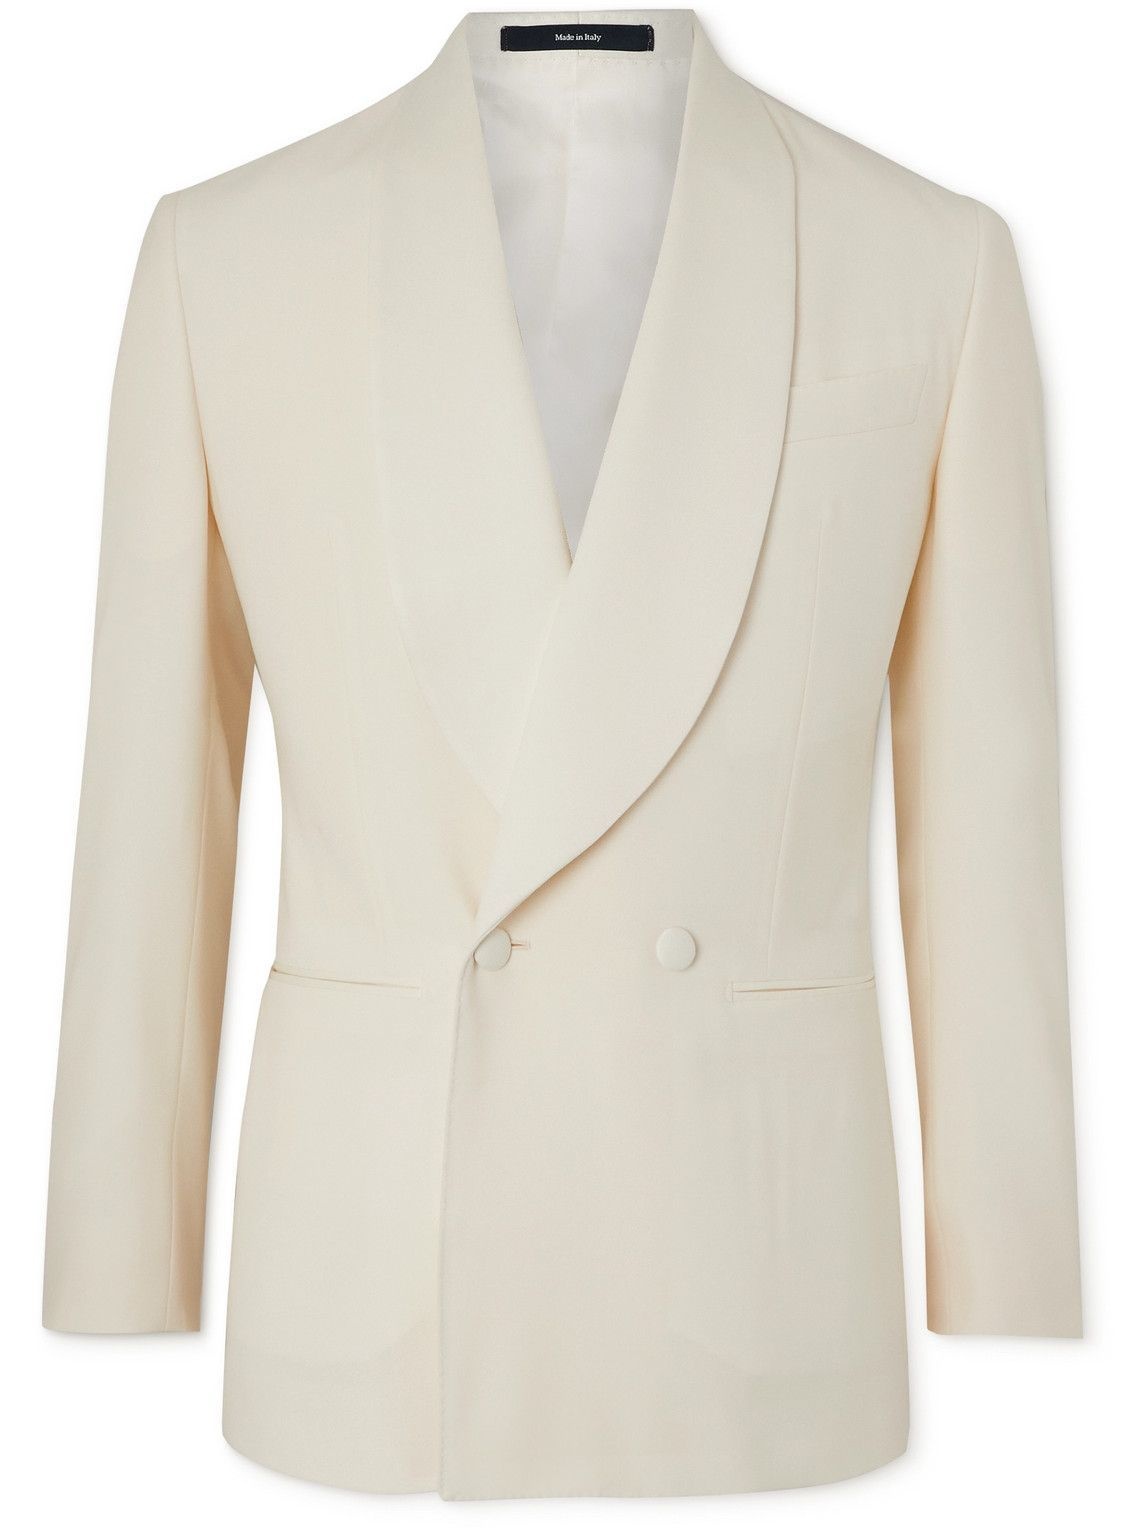 White double breasted tuxedo jacket - Made in Italy